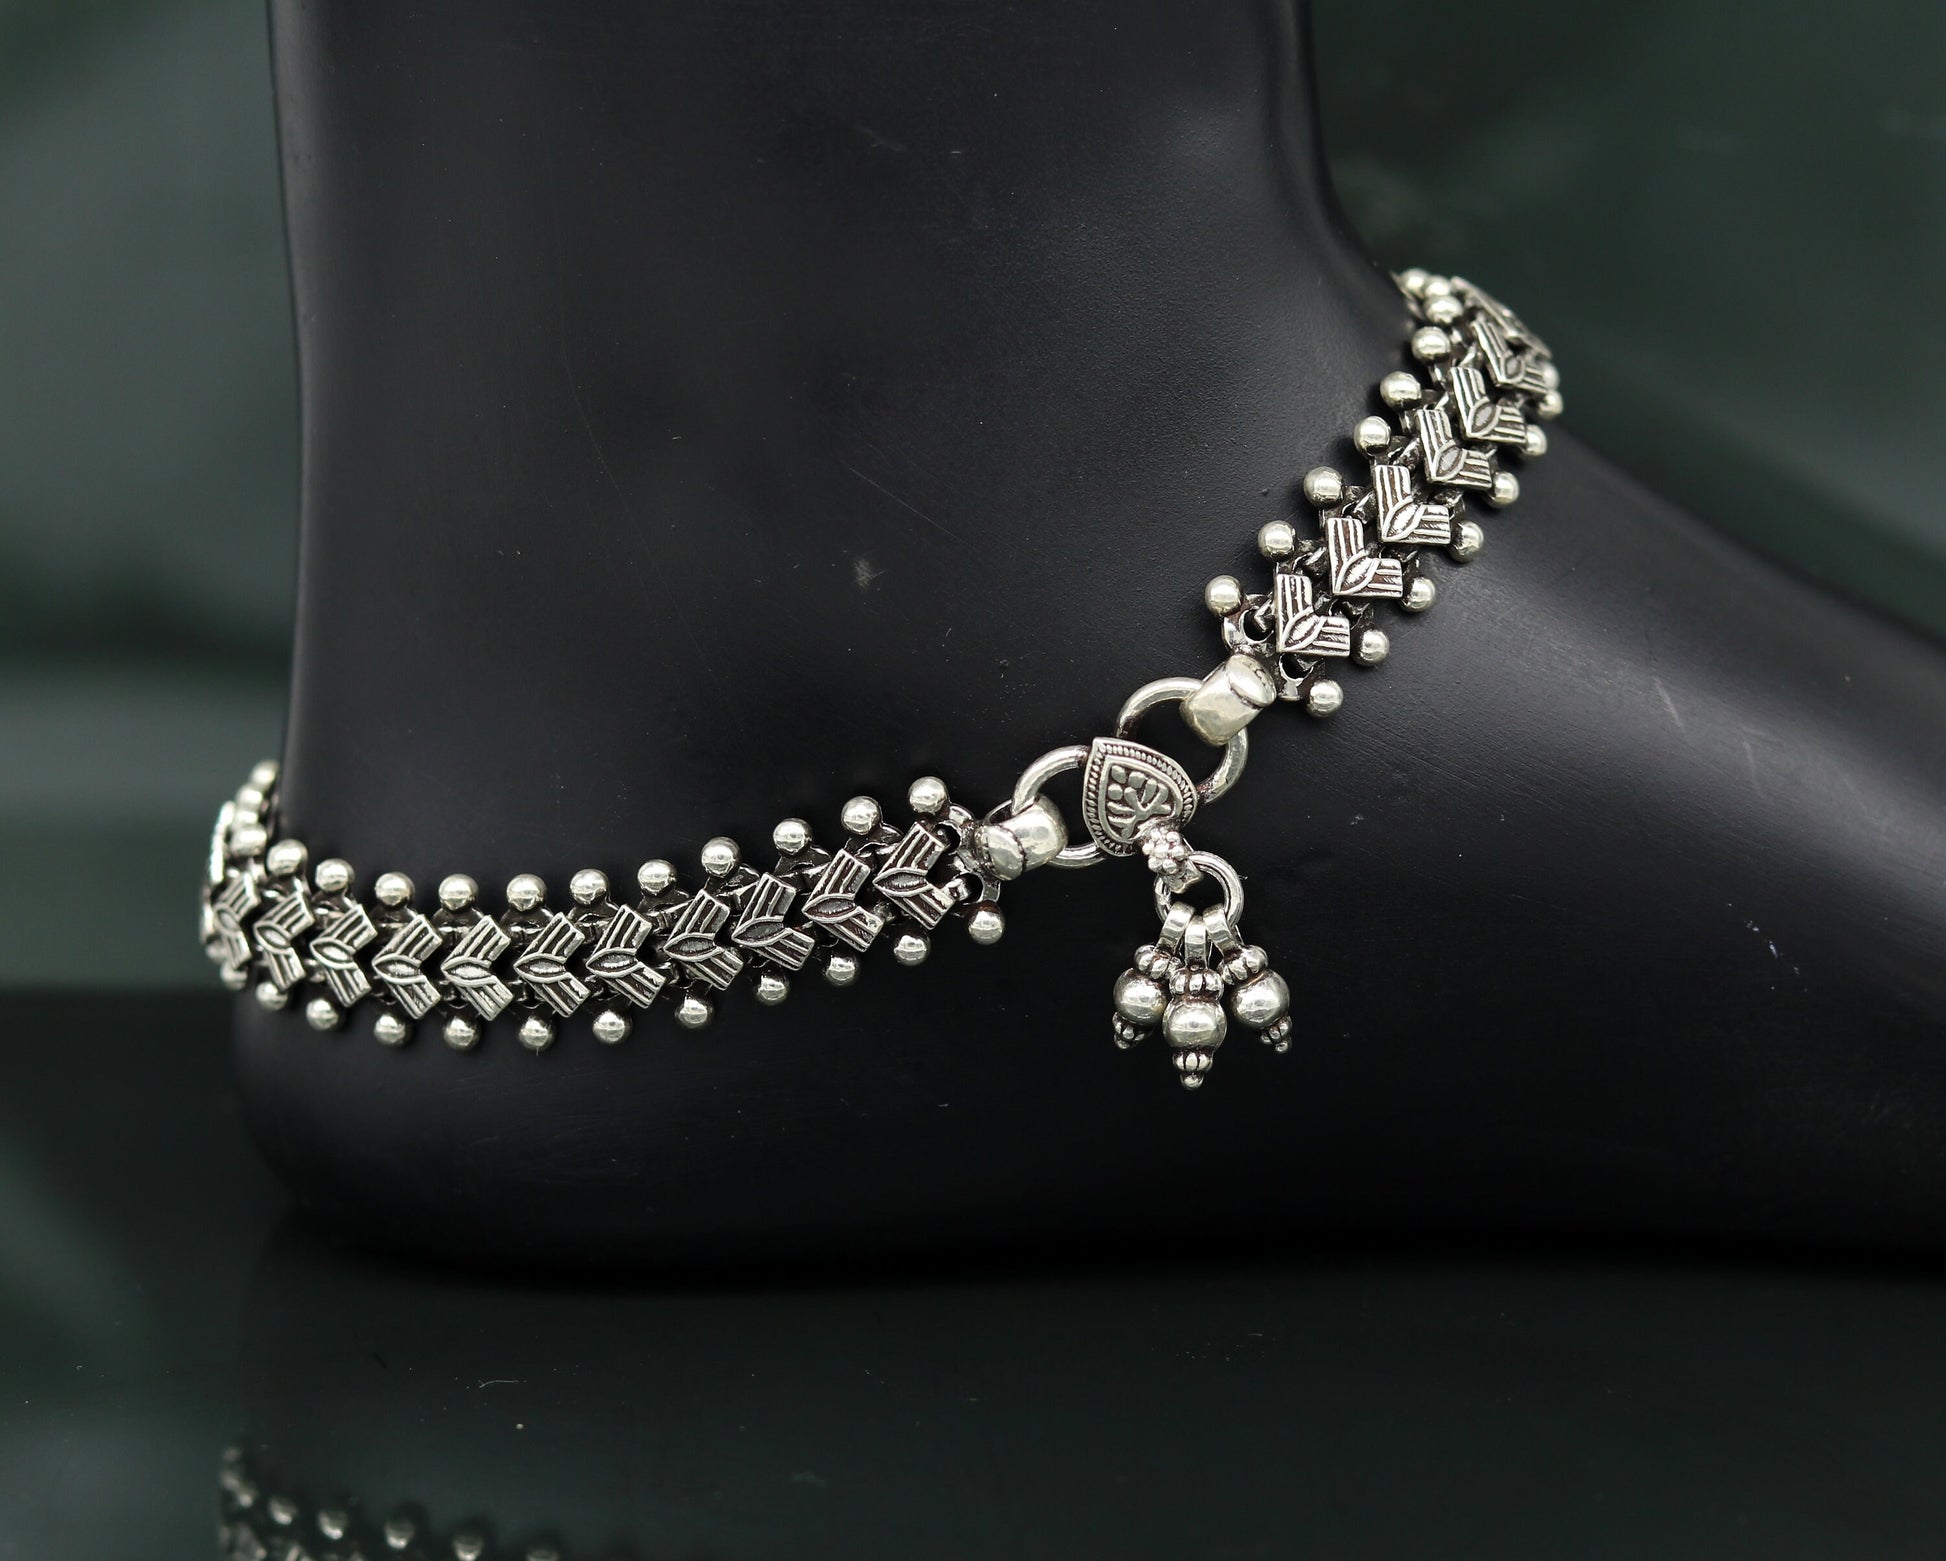 Indian Traditional cultural trendy 925 Sterling silver handmade anklets foot bracelet gift for women's chunky jewelry nank01 - TRIBAL ORNAMENTS